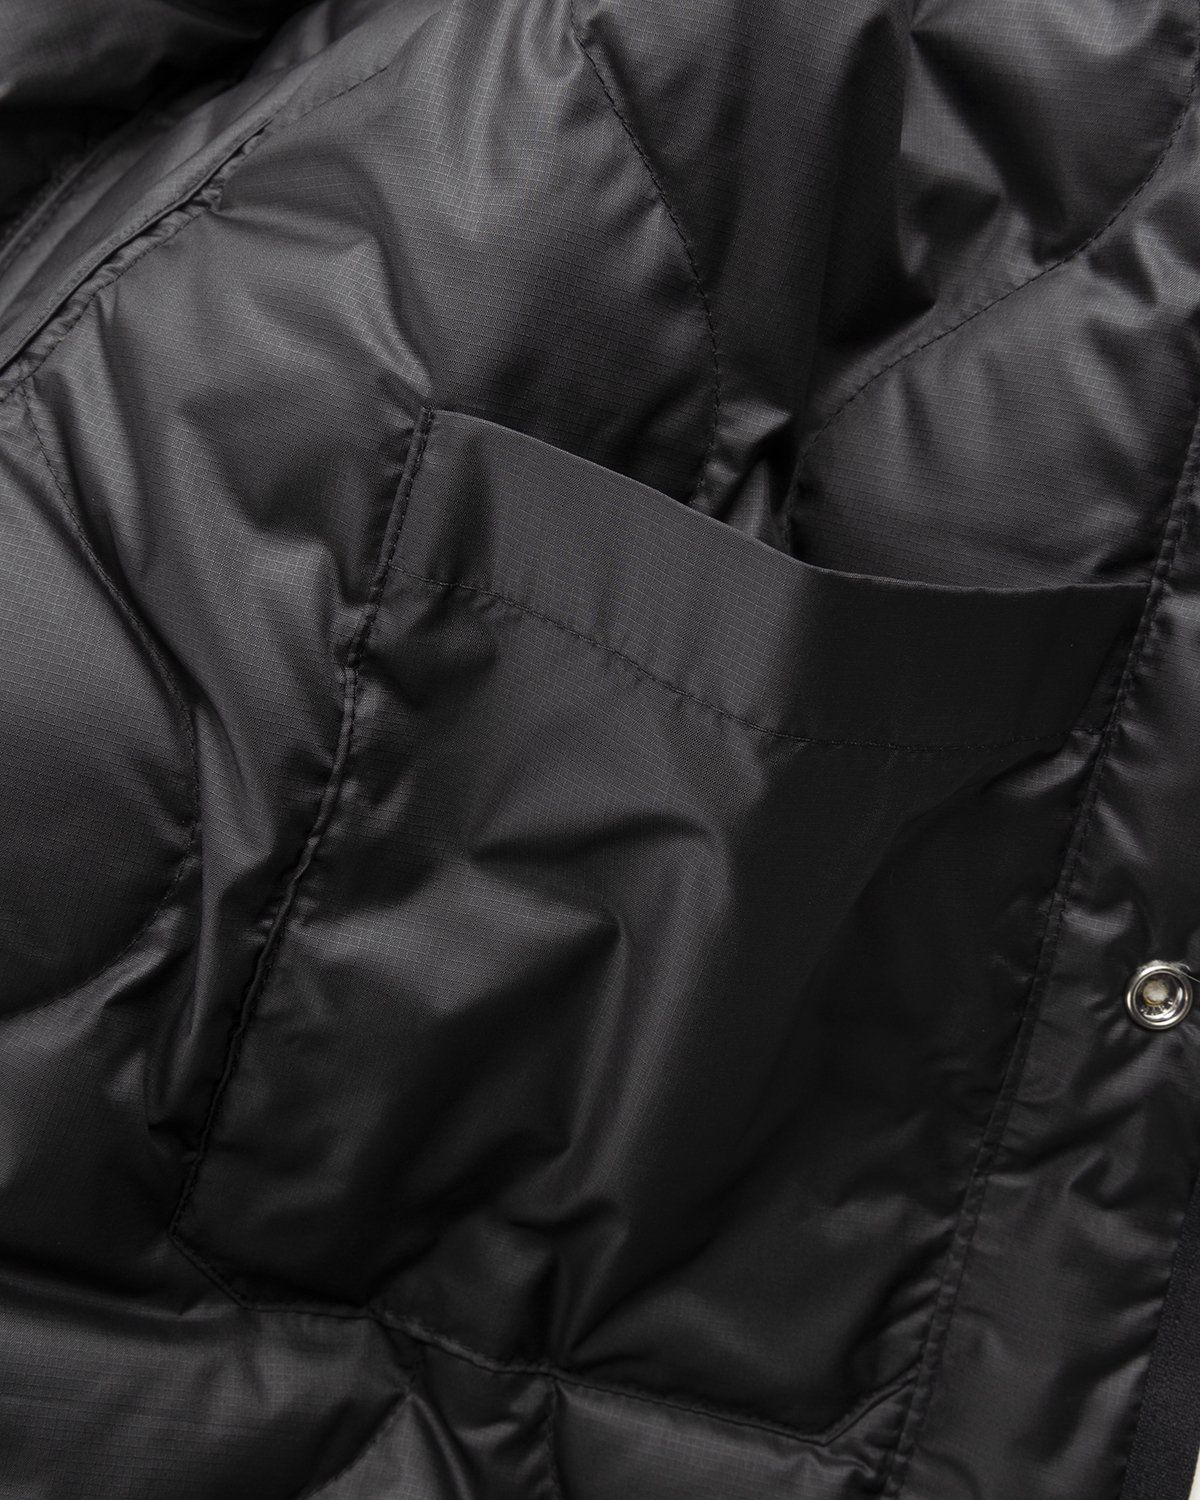 The North Face – M66 Down Jacket Black | Highsnobiety Shop